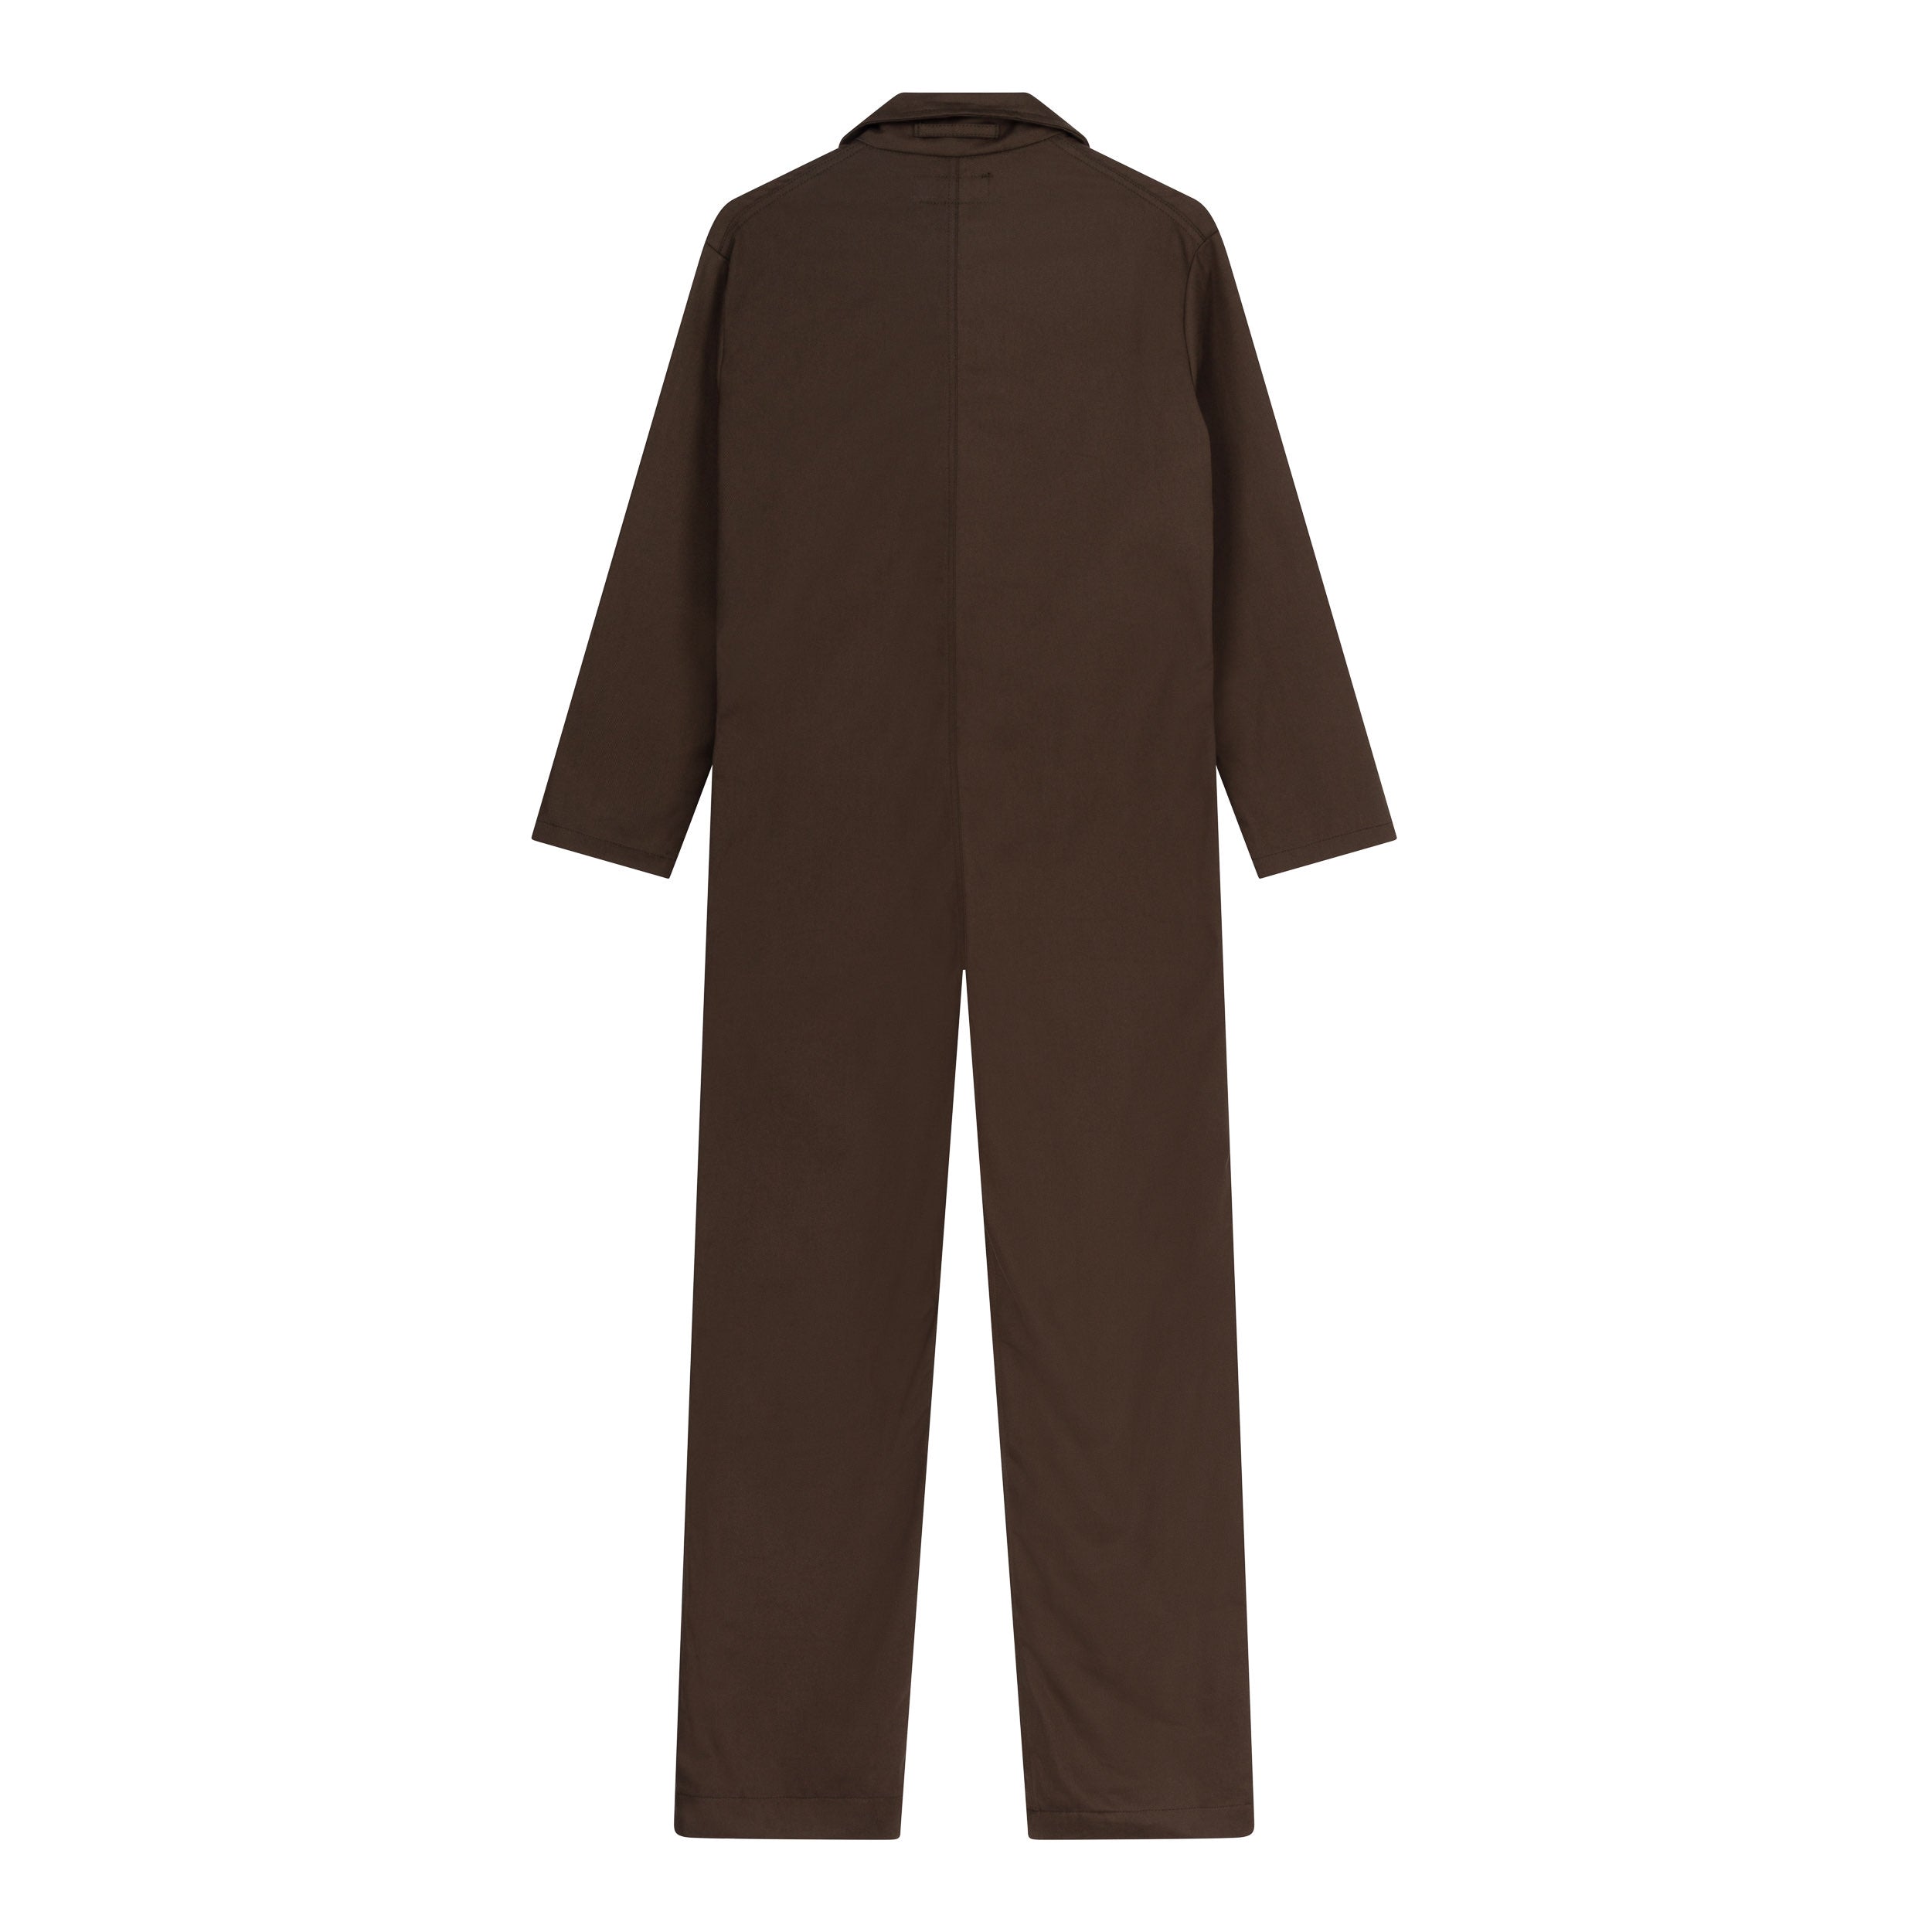 Carrier Company Boiler Suit in Olive Drill